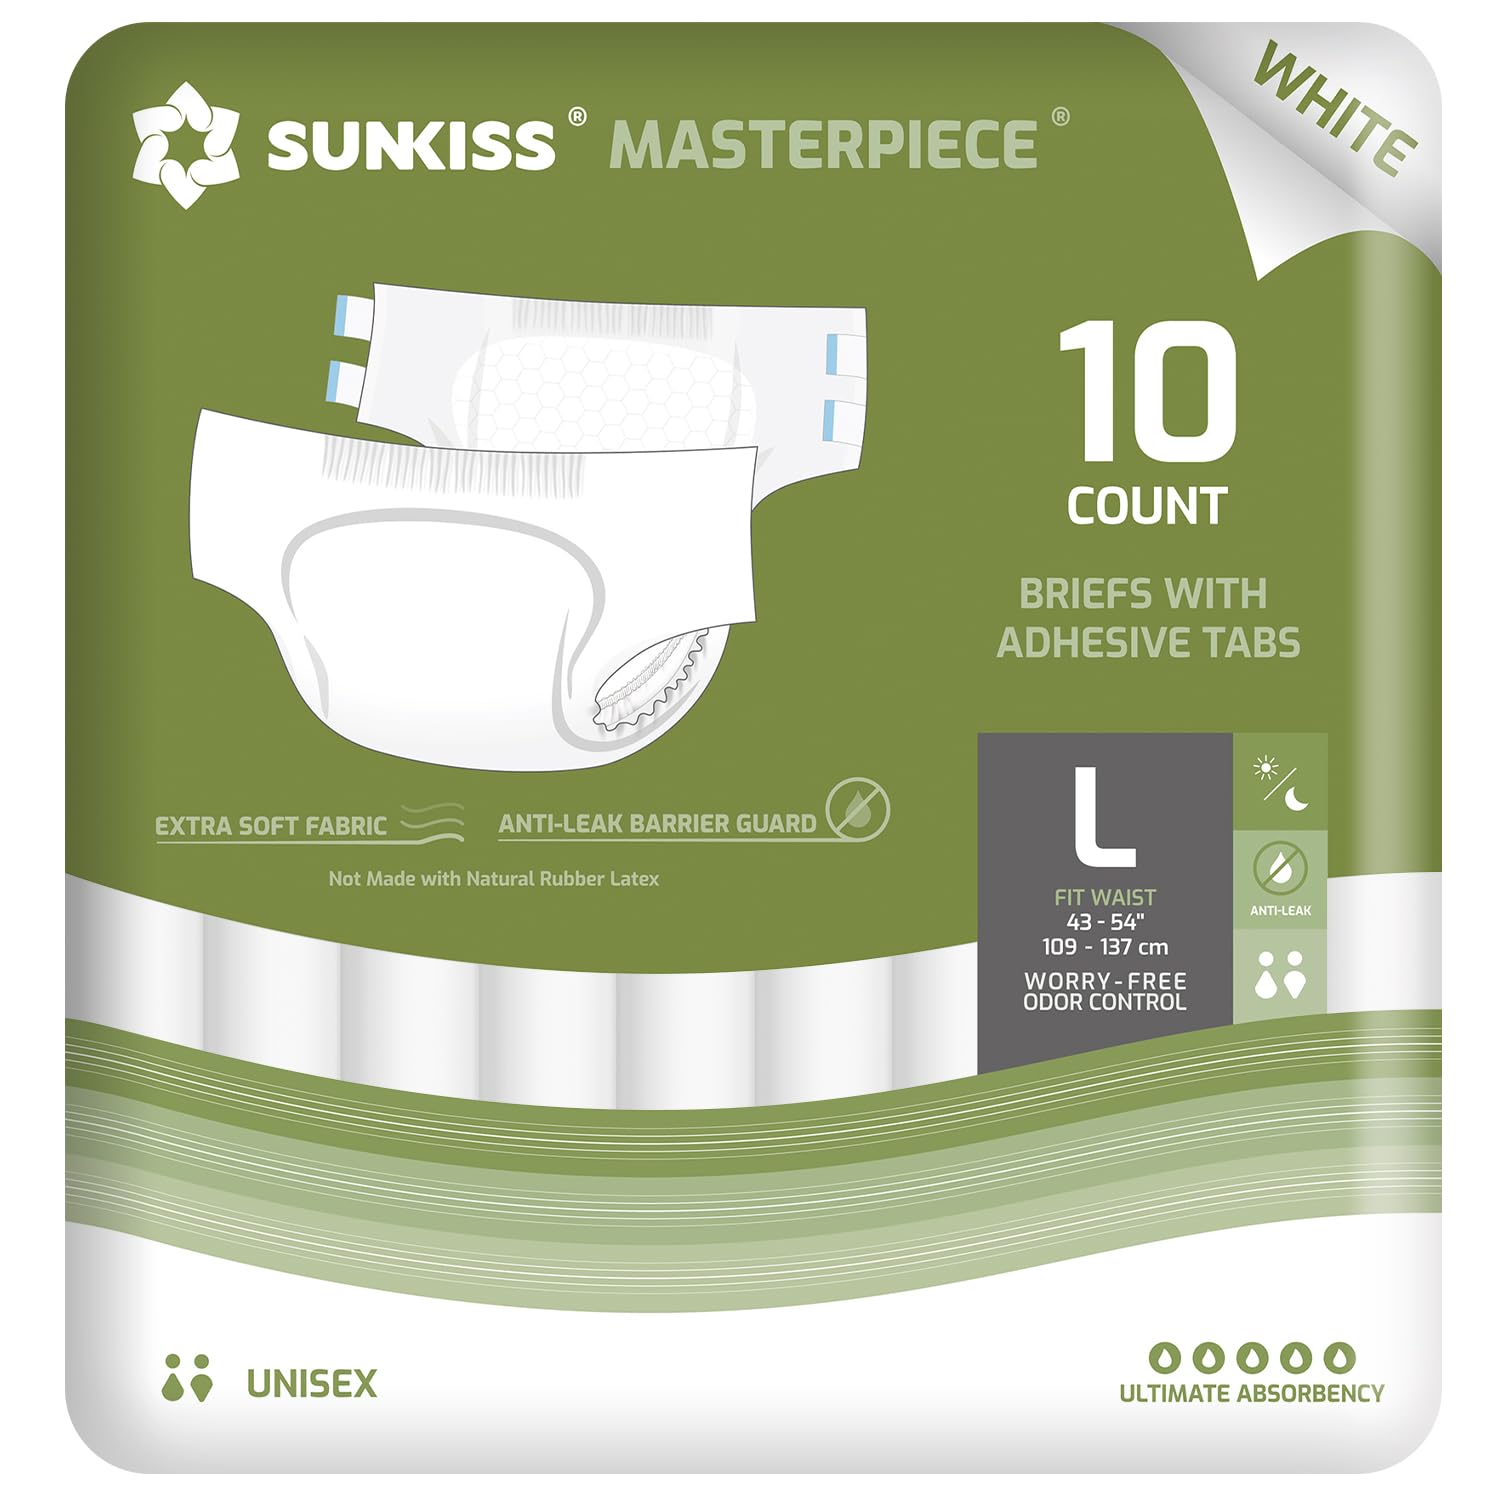 SUNKISS Masterpiece Adult Diapers with Tabs, Unisex Disposable Incontinence Briefs for Women and Men, Odor Control, White, Large